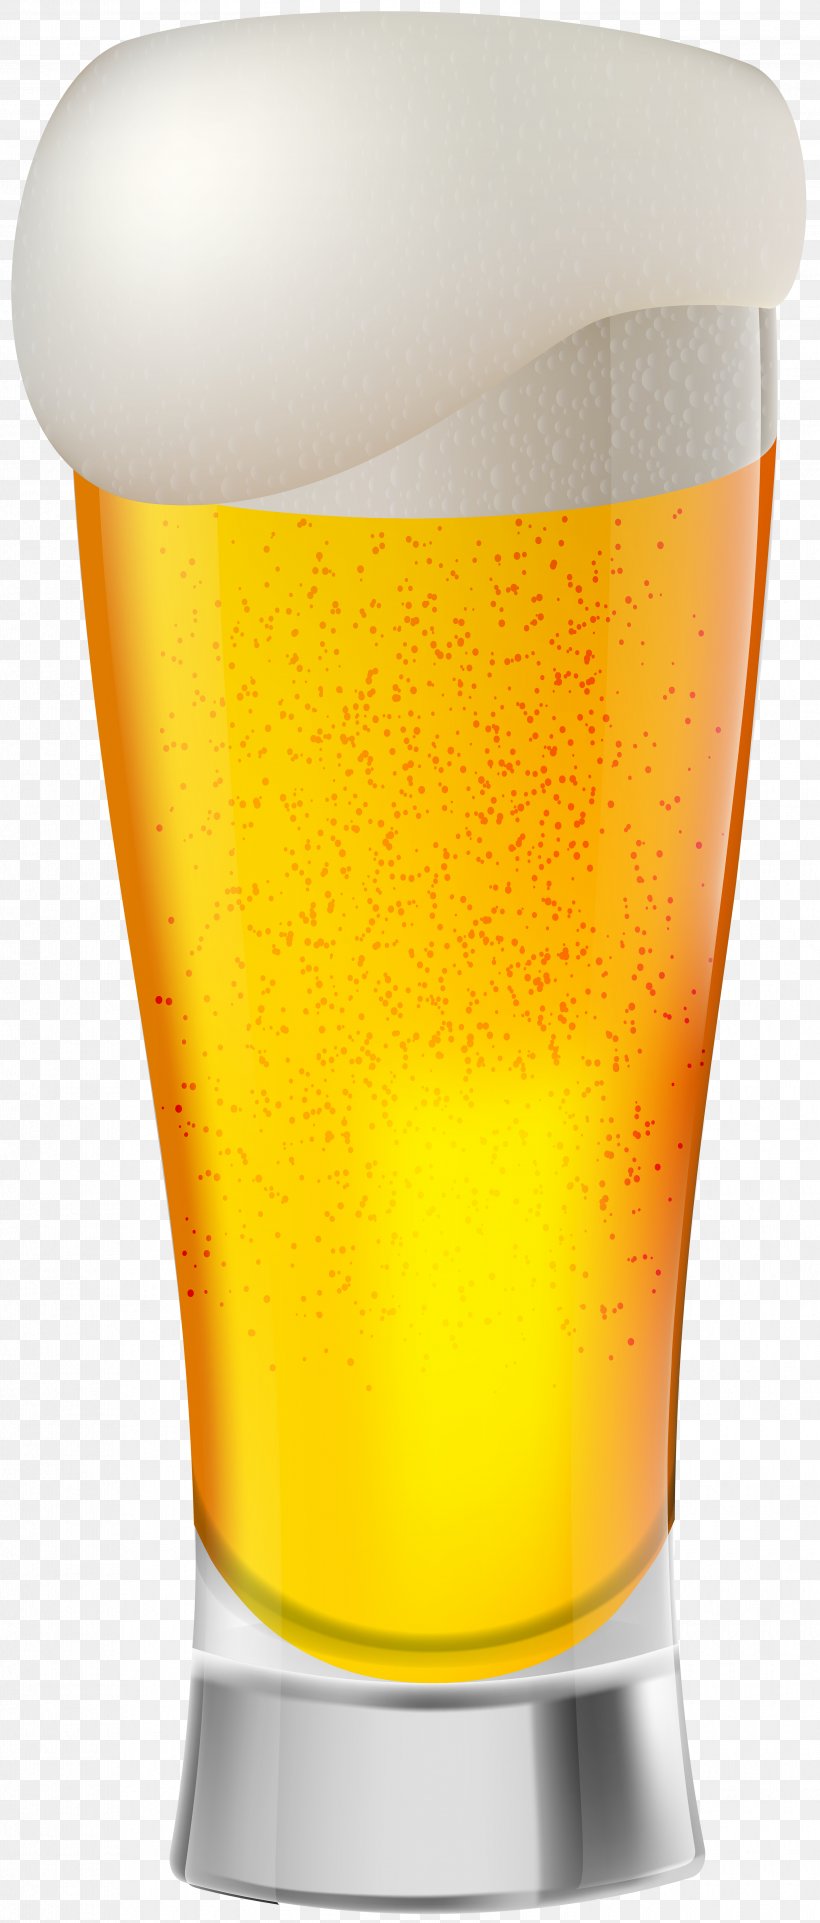 Beer Pint Glass Orange Drink United States Of America, PNG, 3410x8000px, Beer, Alcoholic Drink, Beer Glass, Beer Glasses, Cup Download Free